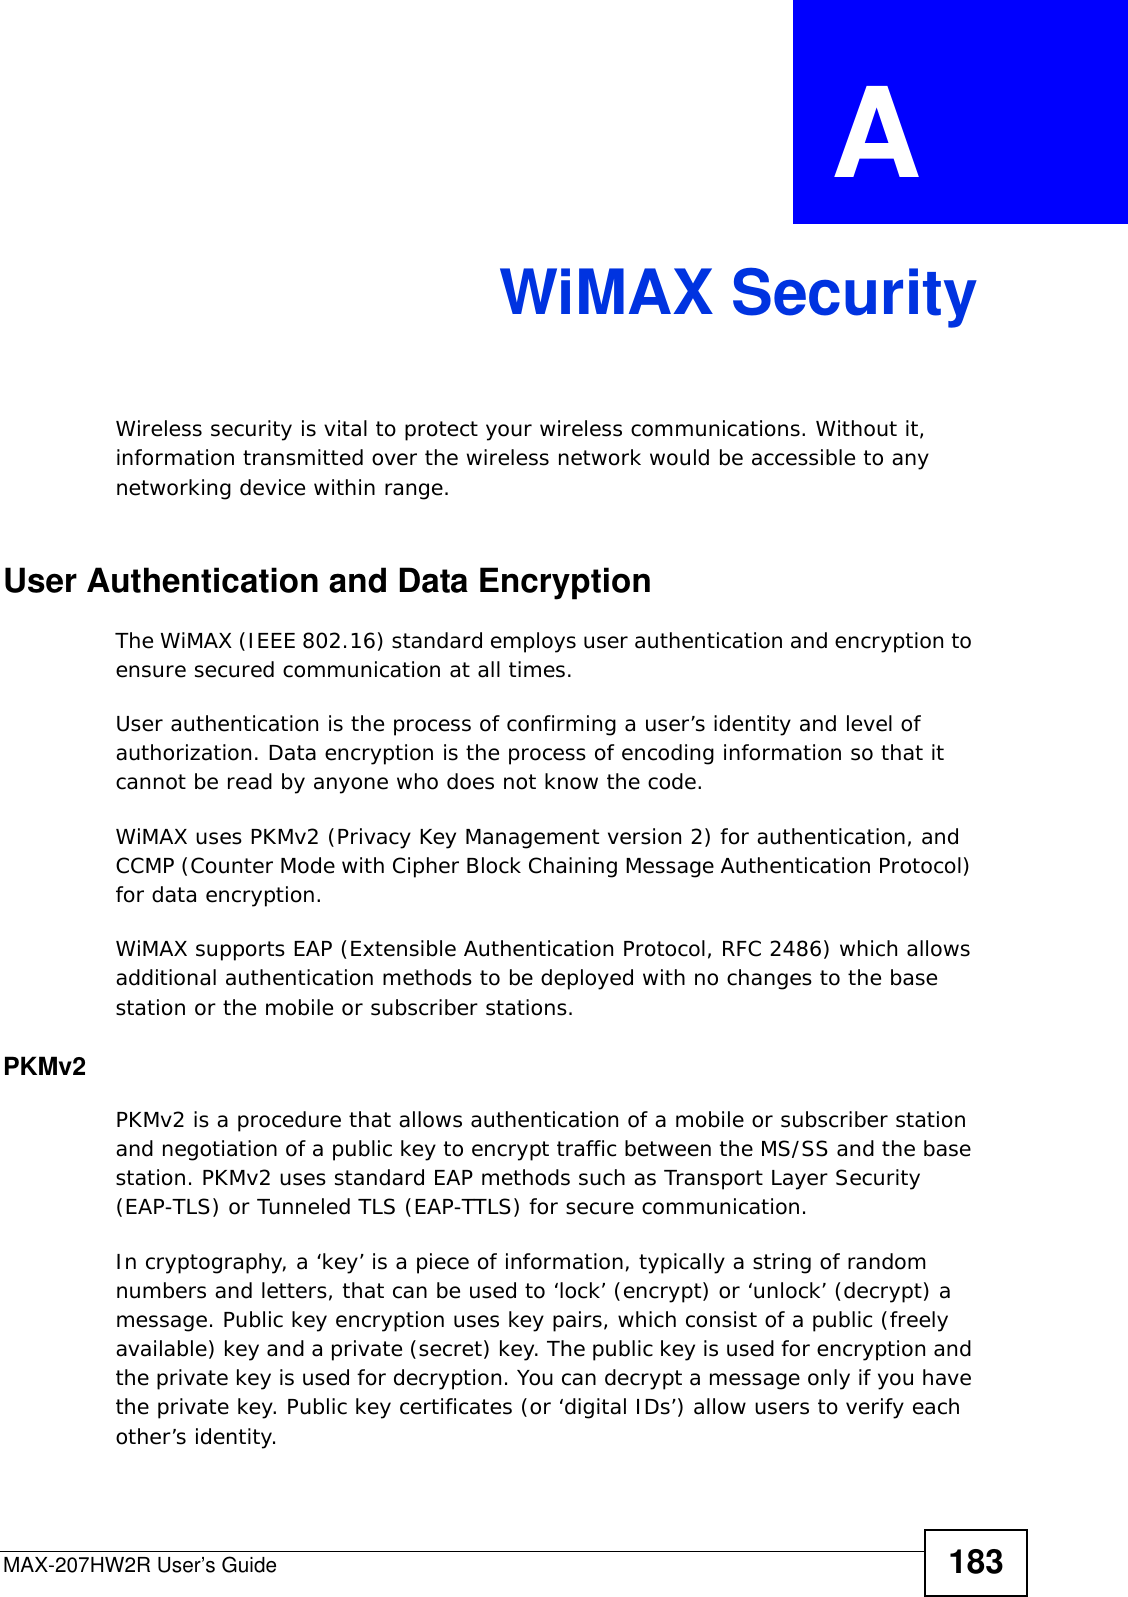 MAX-207HW2R User’s Guide 183APPENDIX  A WiMAX SecurityWireless security is vital to protect your wireless communications. Without it, information transmitted over the wireless network would be accessible to any networking device within range.User Authentication and Data EncryptionThe WiMAX (IEEE 802.16) standard employs user authentication and encryption to ensure secured communication at all times.User authentication is the process of confirming a user’s identity and level of authorization. Data encryption is the process of encoding information so that it cannot be read by anyone who does not know the code. WiMAX uses PKMv2 (Privacy Key Management version 2) for authentication, and CCMP (Counter Mode with Cipher Block Chaining Message Authentication Protocol) for data encryption. WiMAX supports EAP (Extensible Authentication Protocol, RFC 2486) which allows additional authentication methods to be deployed with no changes to the base station or the mobile or subscriber stations.PKMv2PKMv2 is a procedure that allows authentication of a mobile or subscriber station and negotiation of a public key to encrypt traffic between the MS/SS and the base station. PKMv2 uses standard EAP methods such as Transport Layer Security (EAP-TLS) or Tunneled TLS (EAP-TTLS) for secure communication. In cryptography, a ‘key’ is a piece of information, typically a string of random numbers and letters, that can be used to ‘lock’ (encrypt) or ‘unlock’ (decrypt) a message. Public key encryption uses key pairs, which consist of a public (freely available) key and a private (secret) key. The public key is used for encryption and the private key is used for decryption. You can decrypt a message only if you have the private key. Public key certificates (or ‘digital IDs’) allow users to verify each other’s identity. 